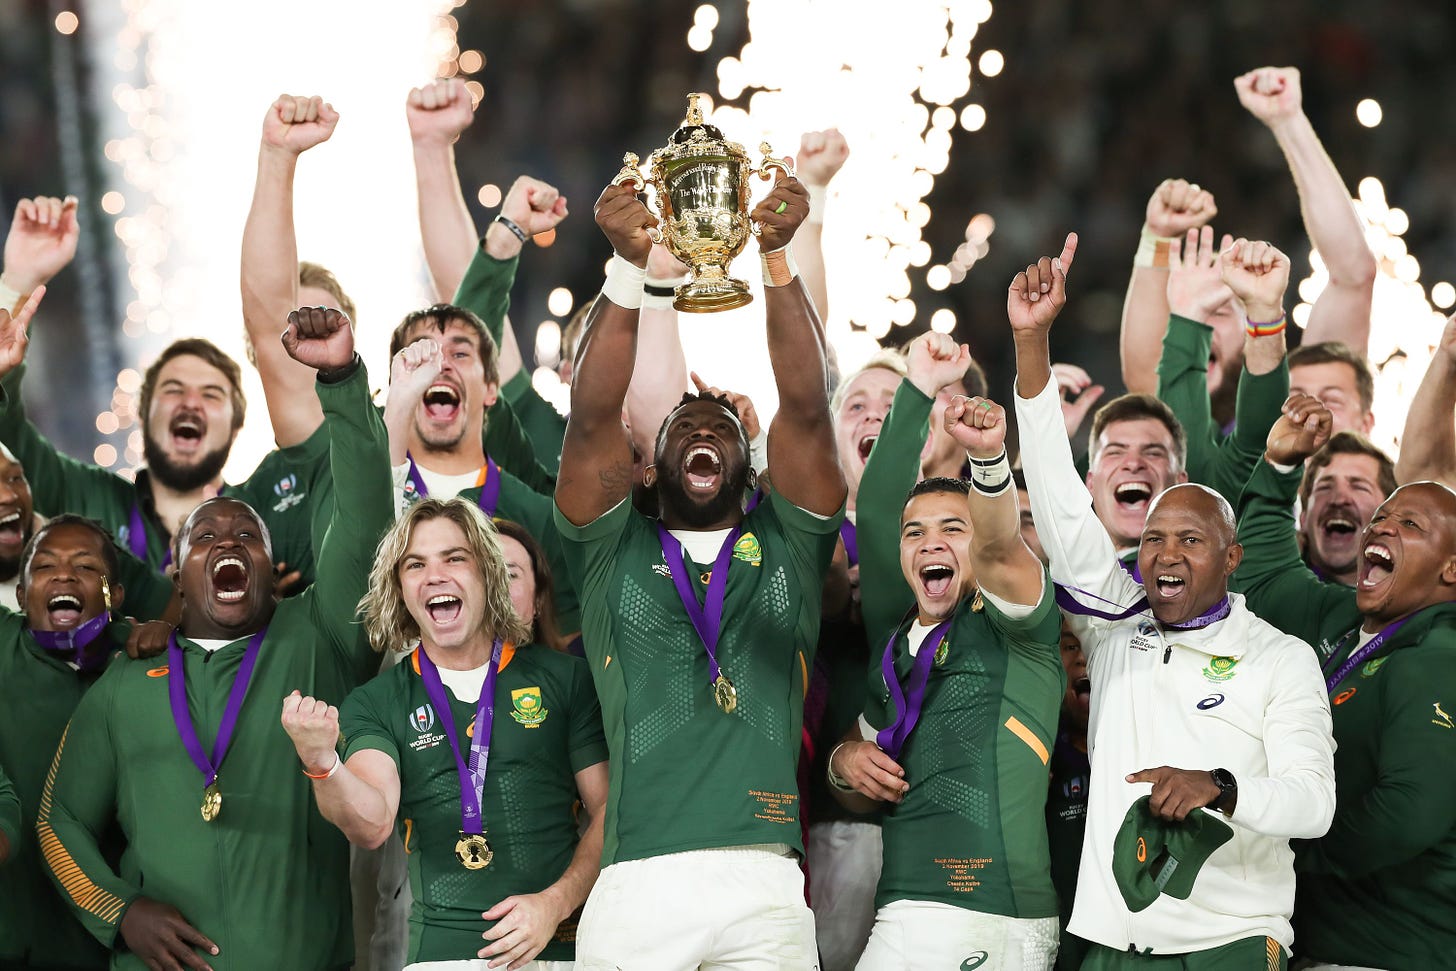 South Africa's Rugby World Cup victory means so much more | CNN